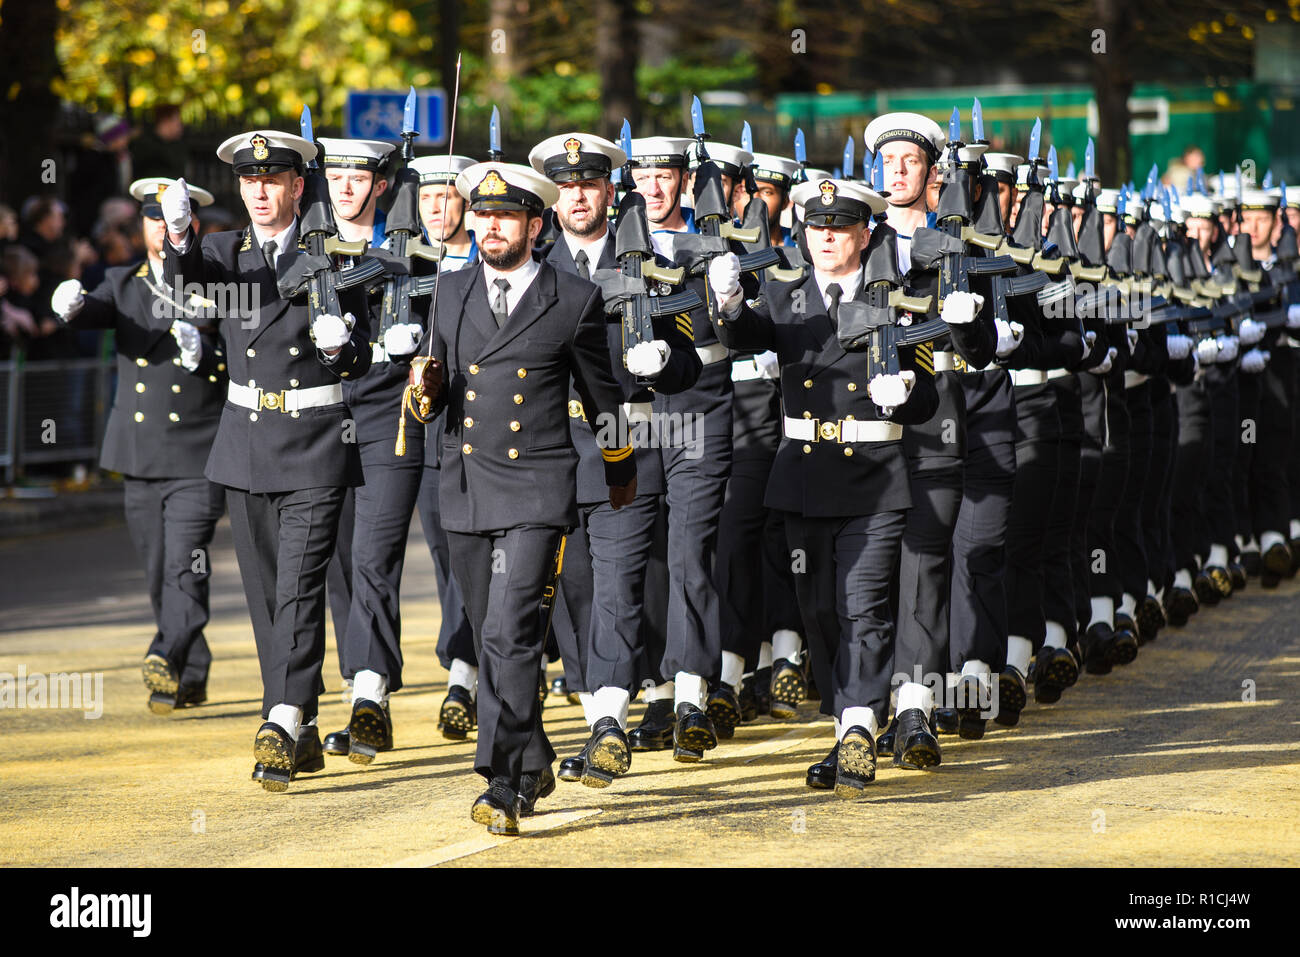 Royal Navy troops marching at the Lord Mayor's Show Parade, London. Stock Photo